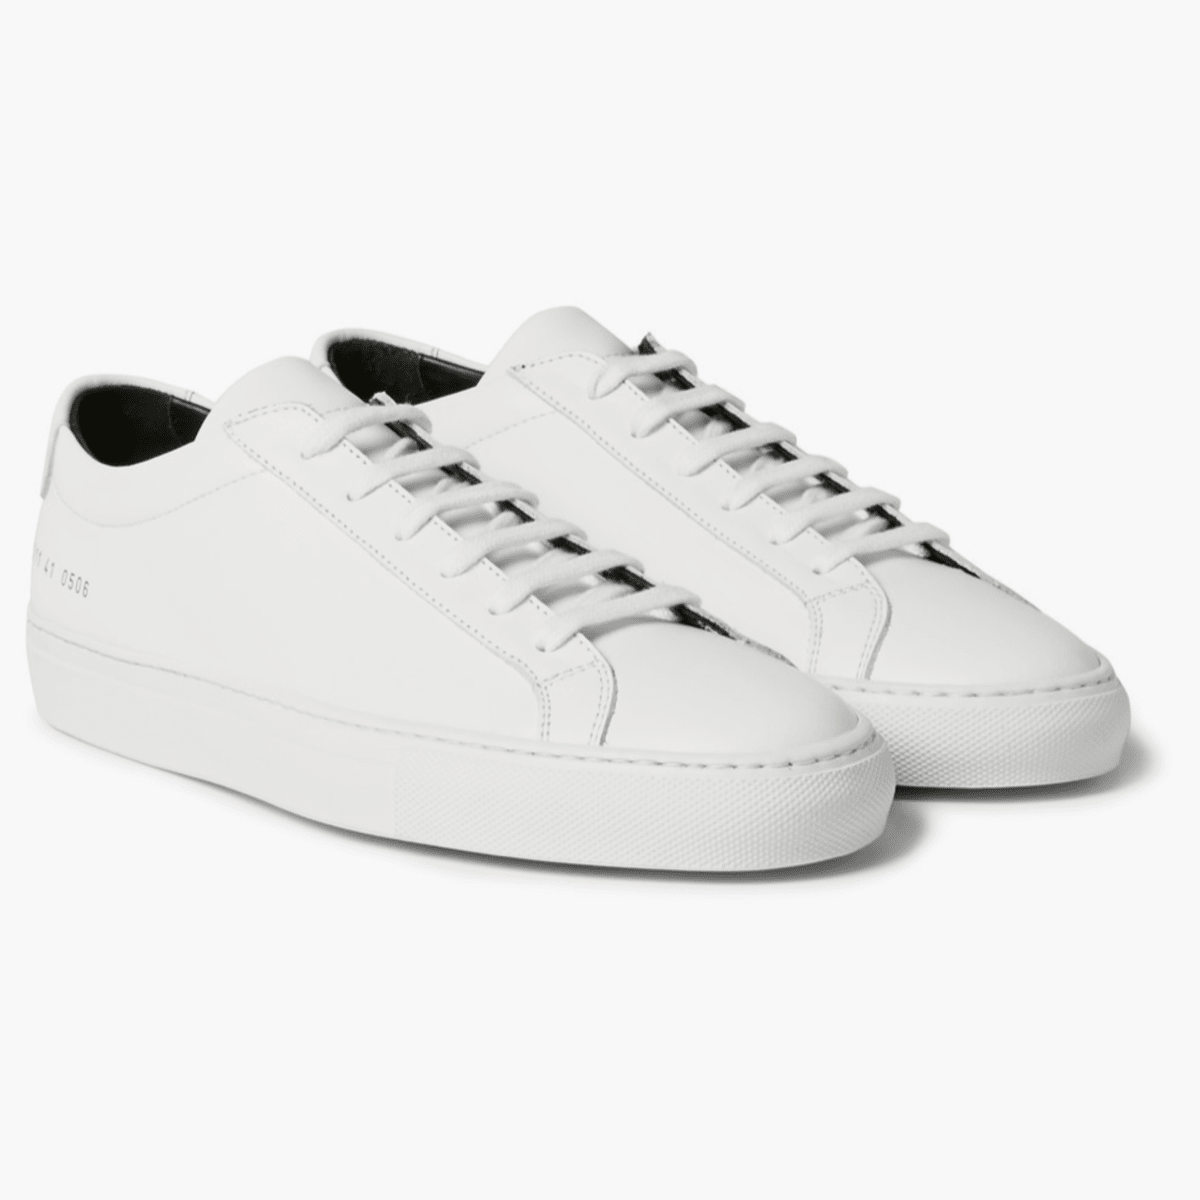 These Common Projects Sneakers Are Subtly Special Edition - Airows